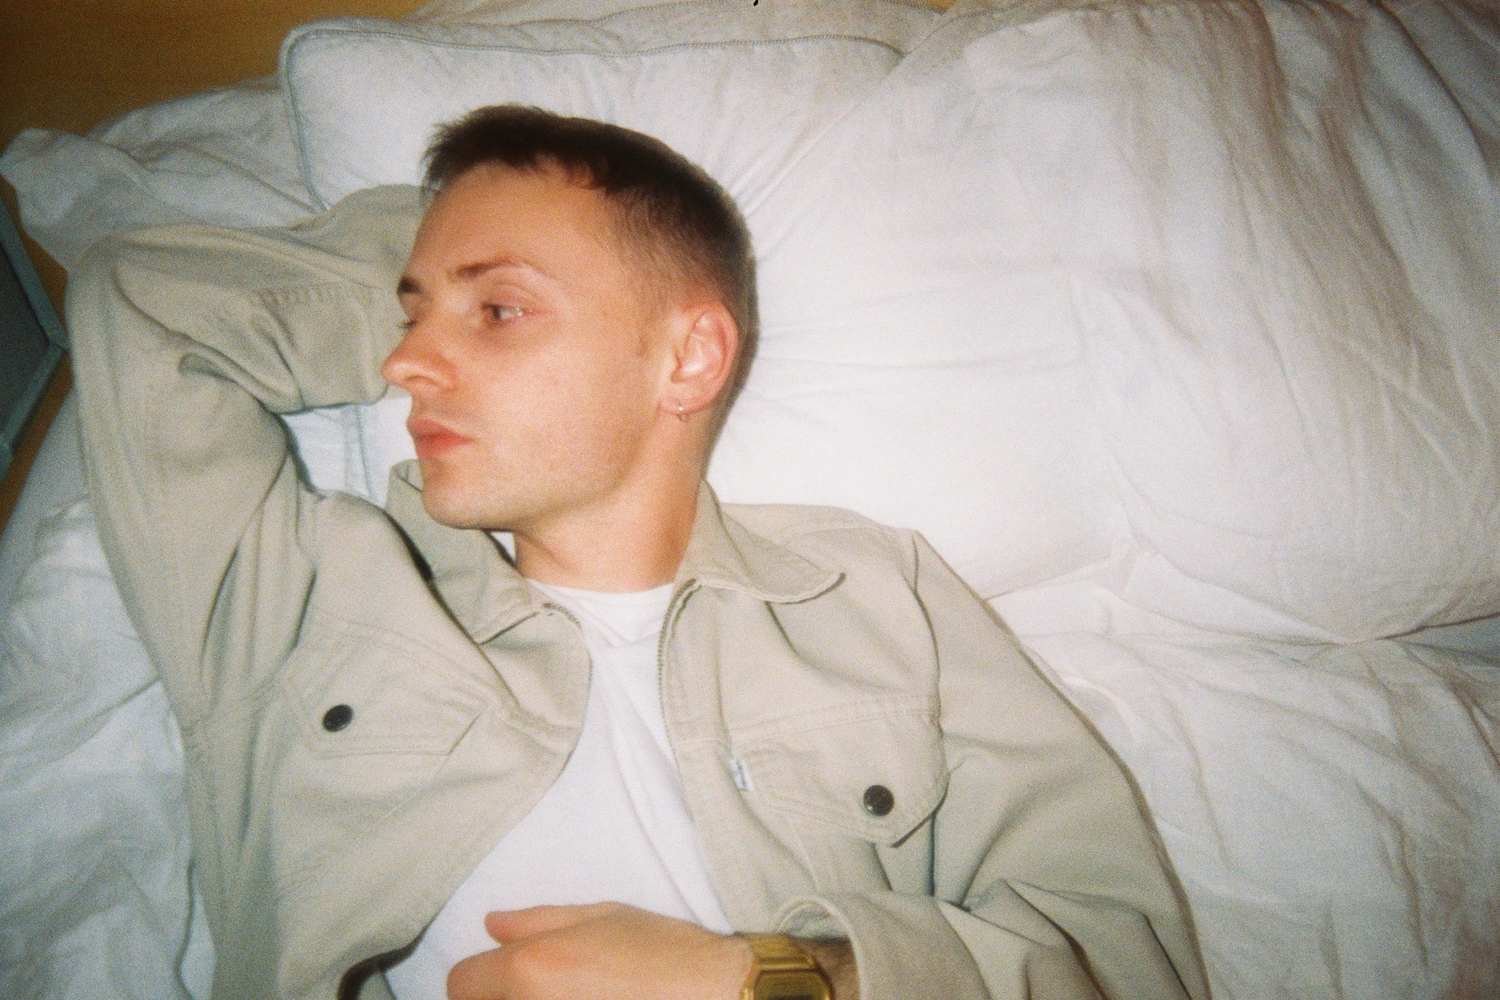 Puma Blue is a Londoner writing 'voicemail ballads'